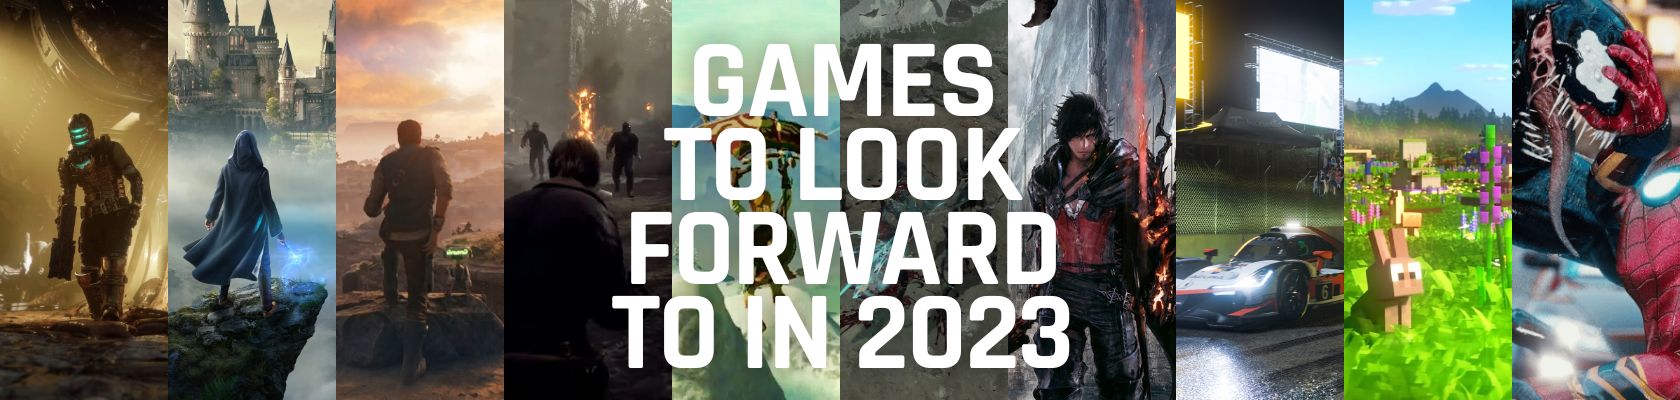 10 Games to Look Forward to in 2023-Custom Controllers UK